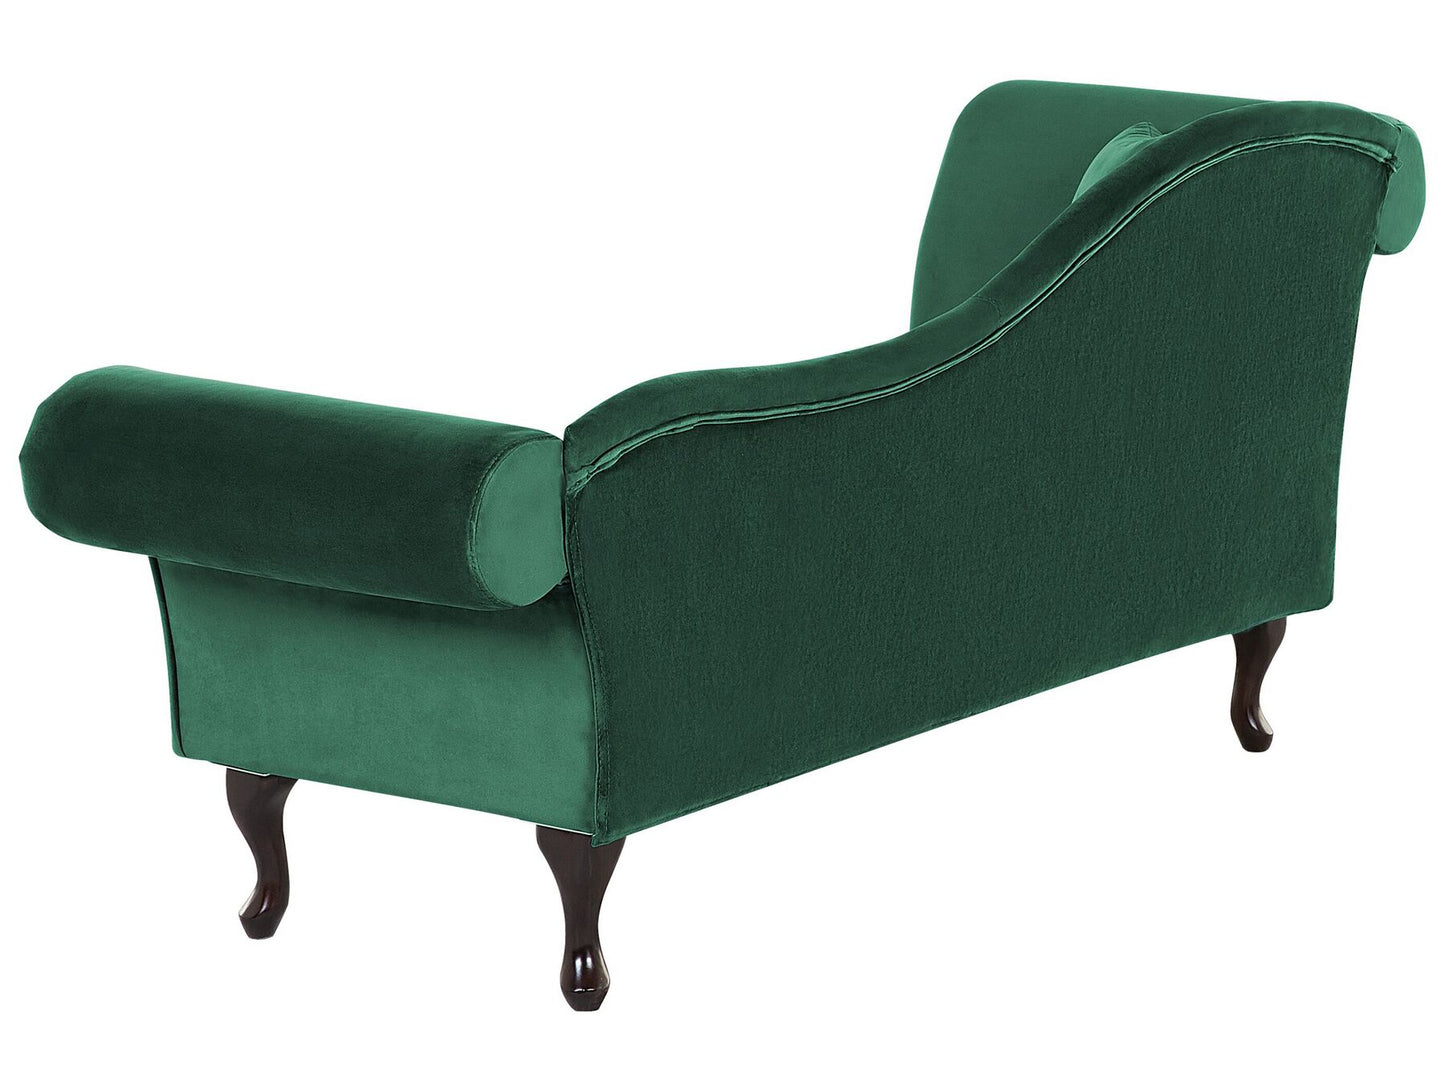 Lates Chesterfield Chaise